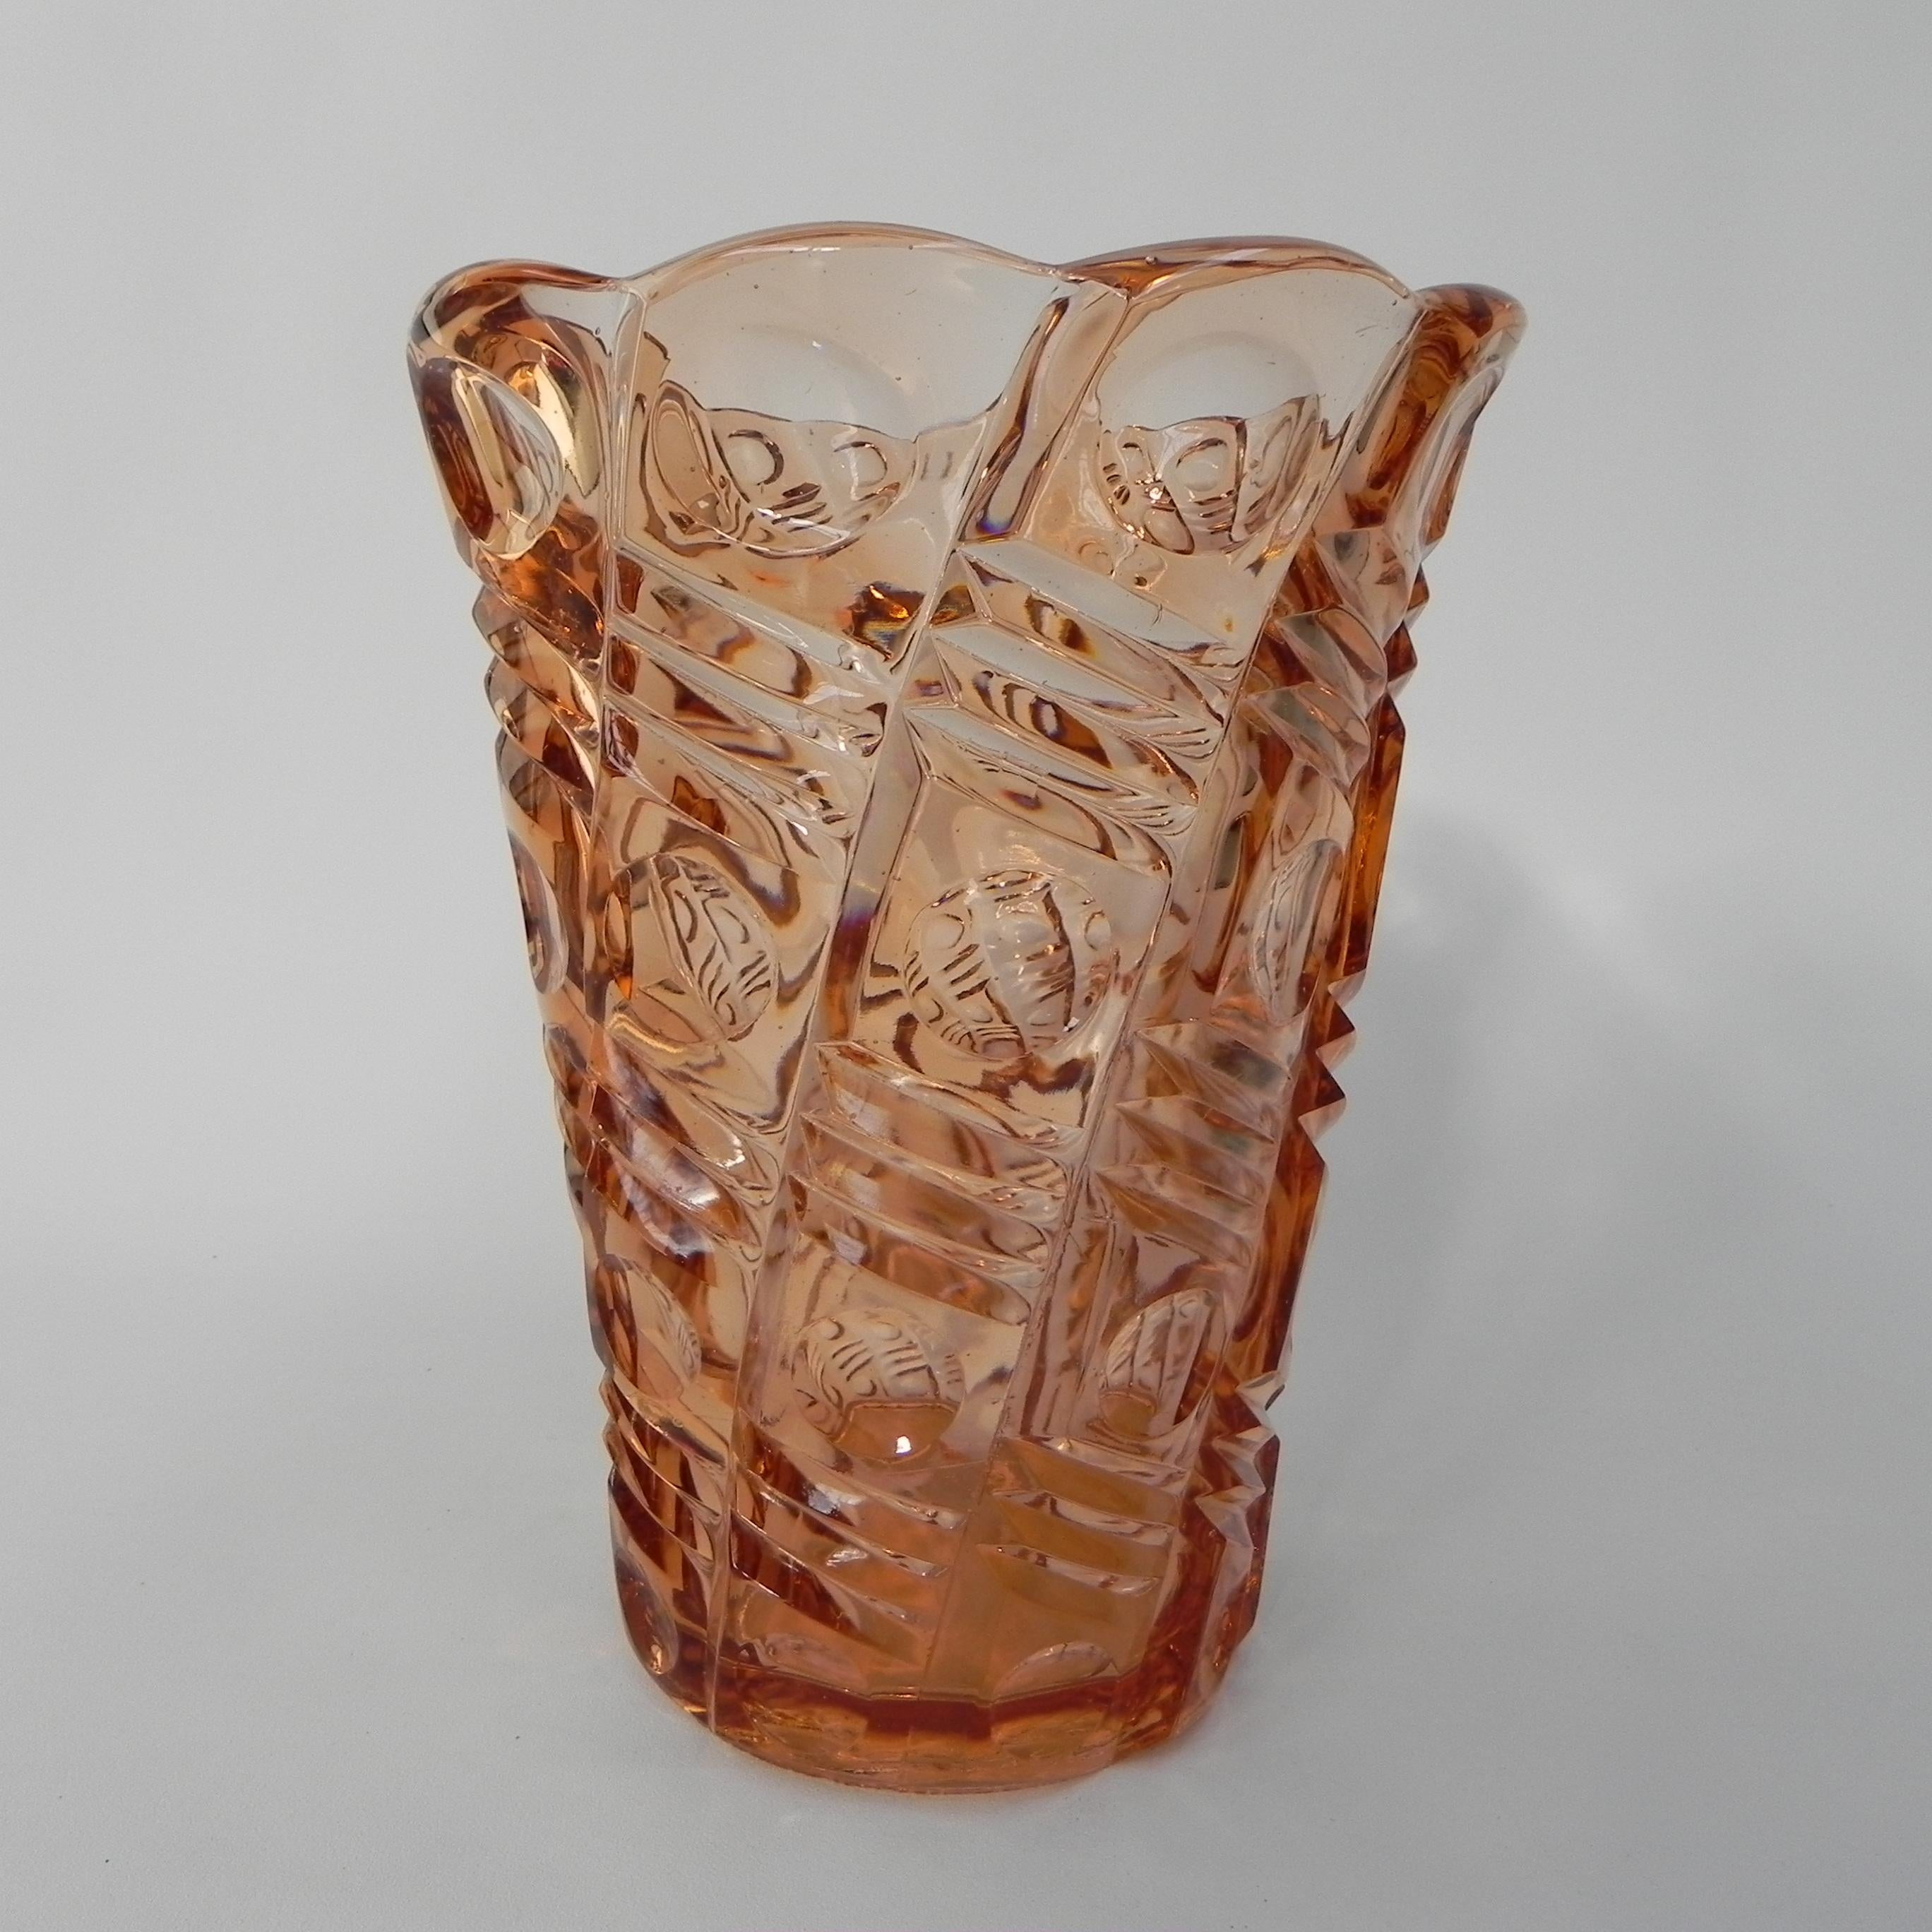 A 9-sided model vase from the Art Deco period
made of light salmon colored glass.

Height: 29.5 cm.
Ø: 22.5 cm.
Origin: Czechoslovakia, 1930s.
Material: glass.